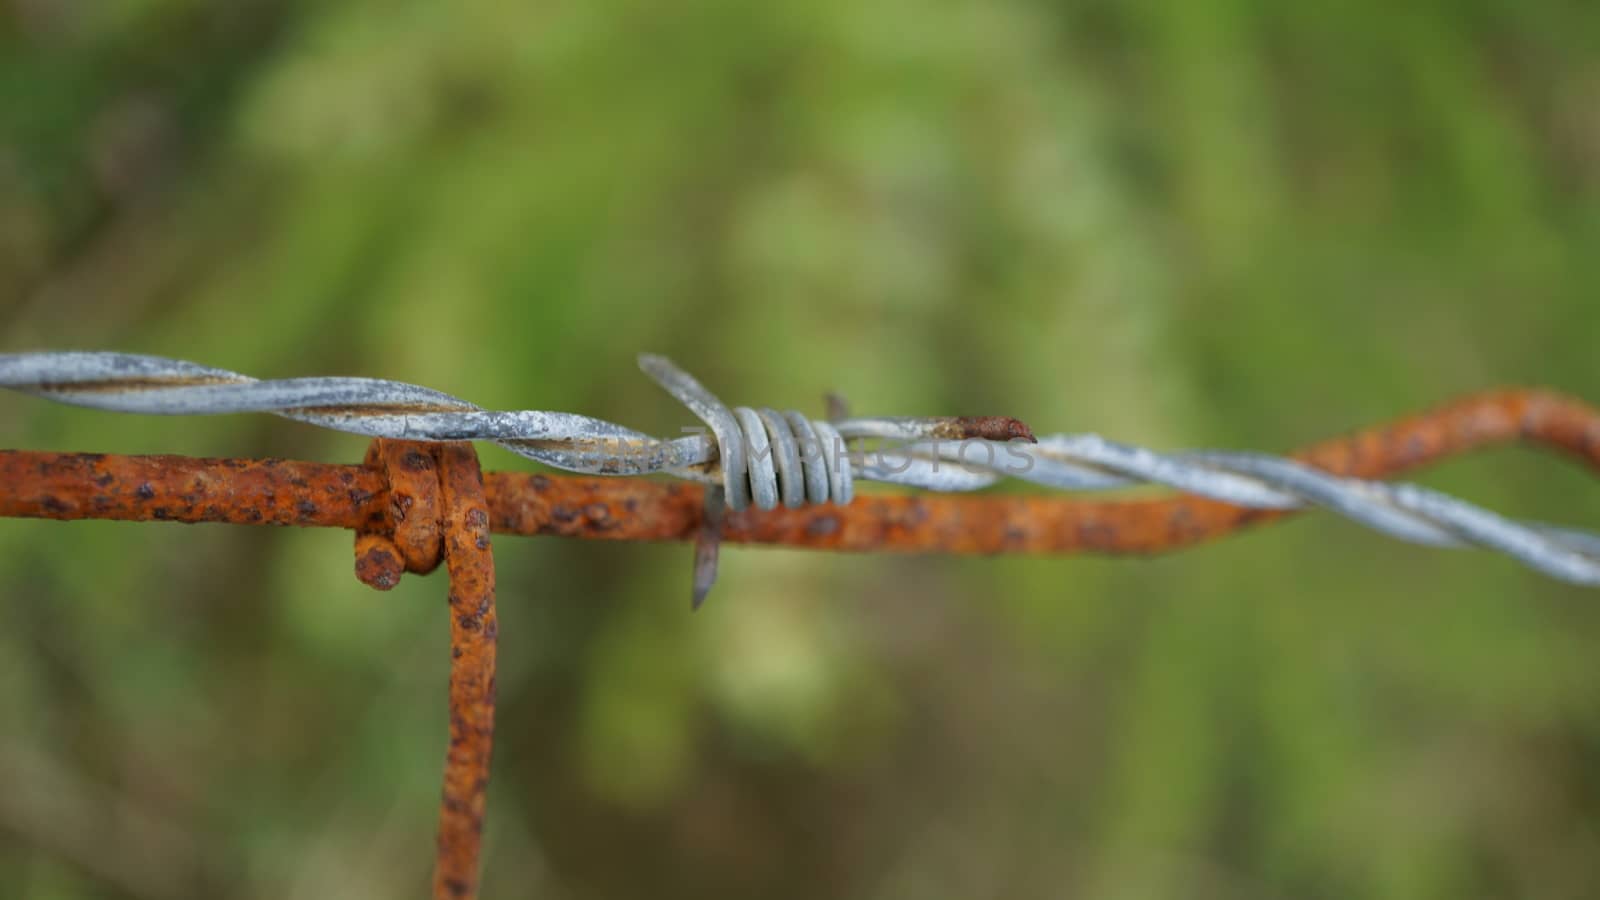 barb wire by olsen90